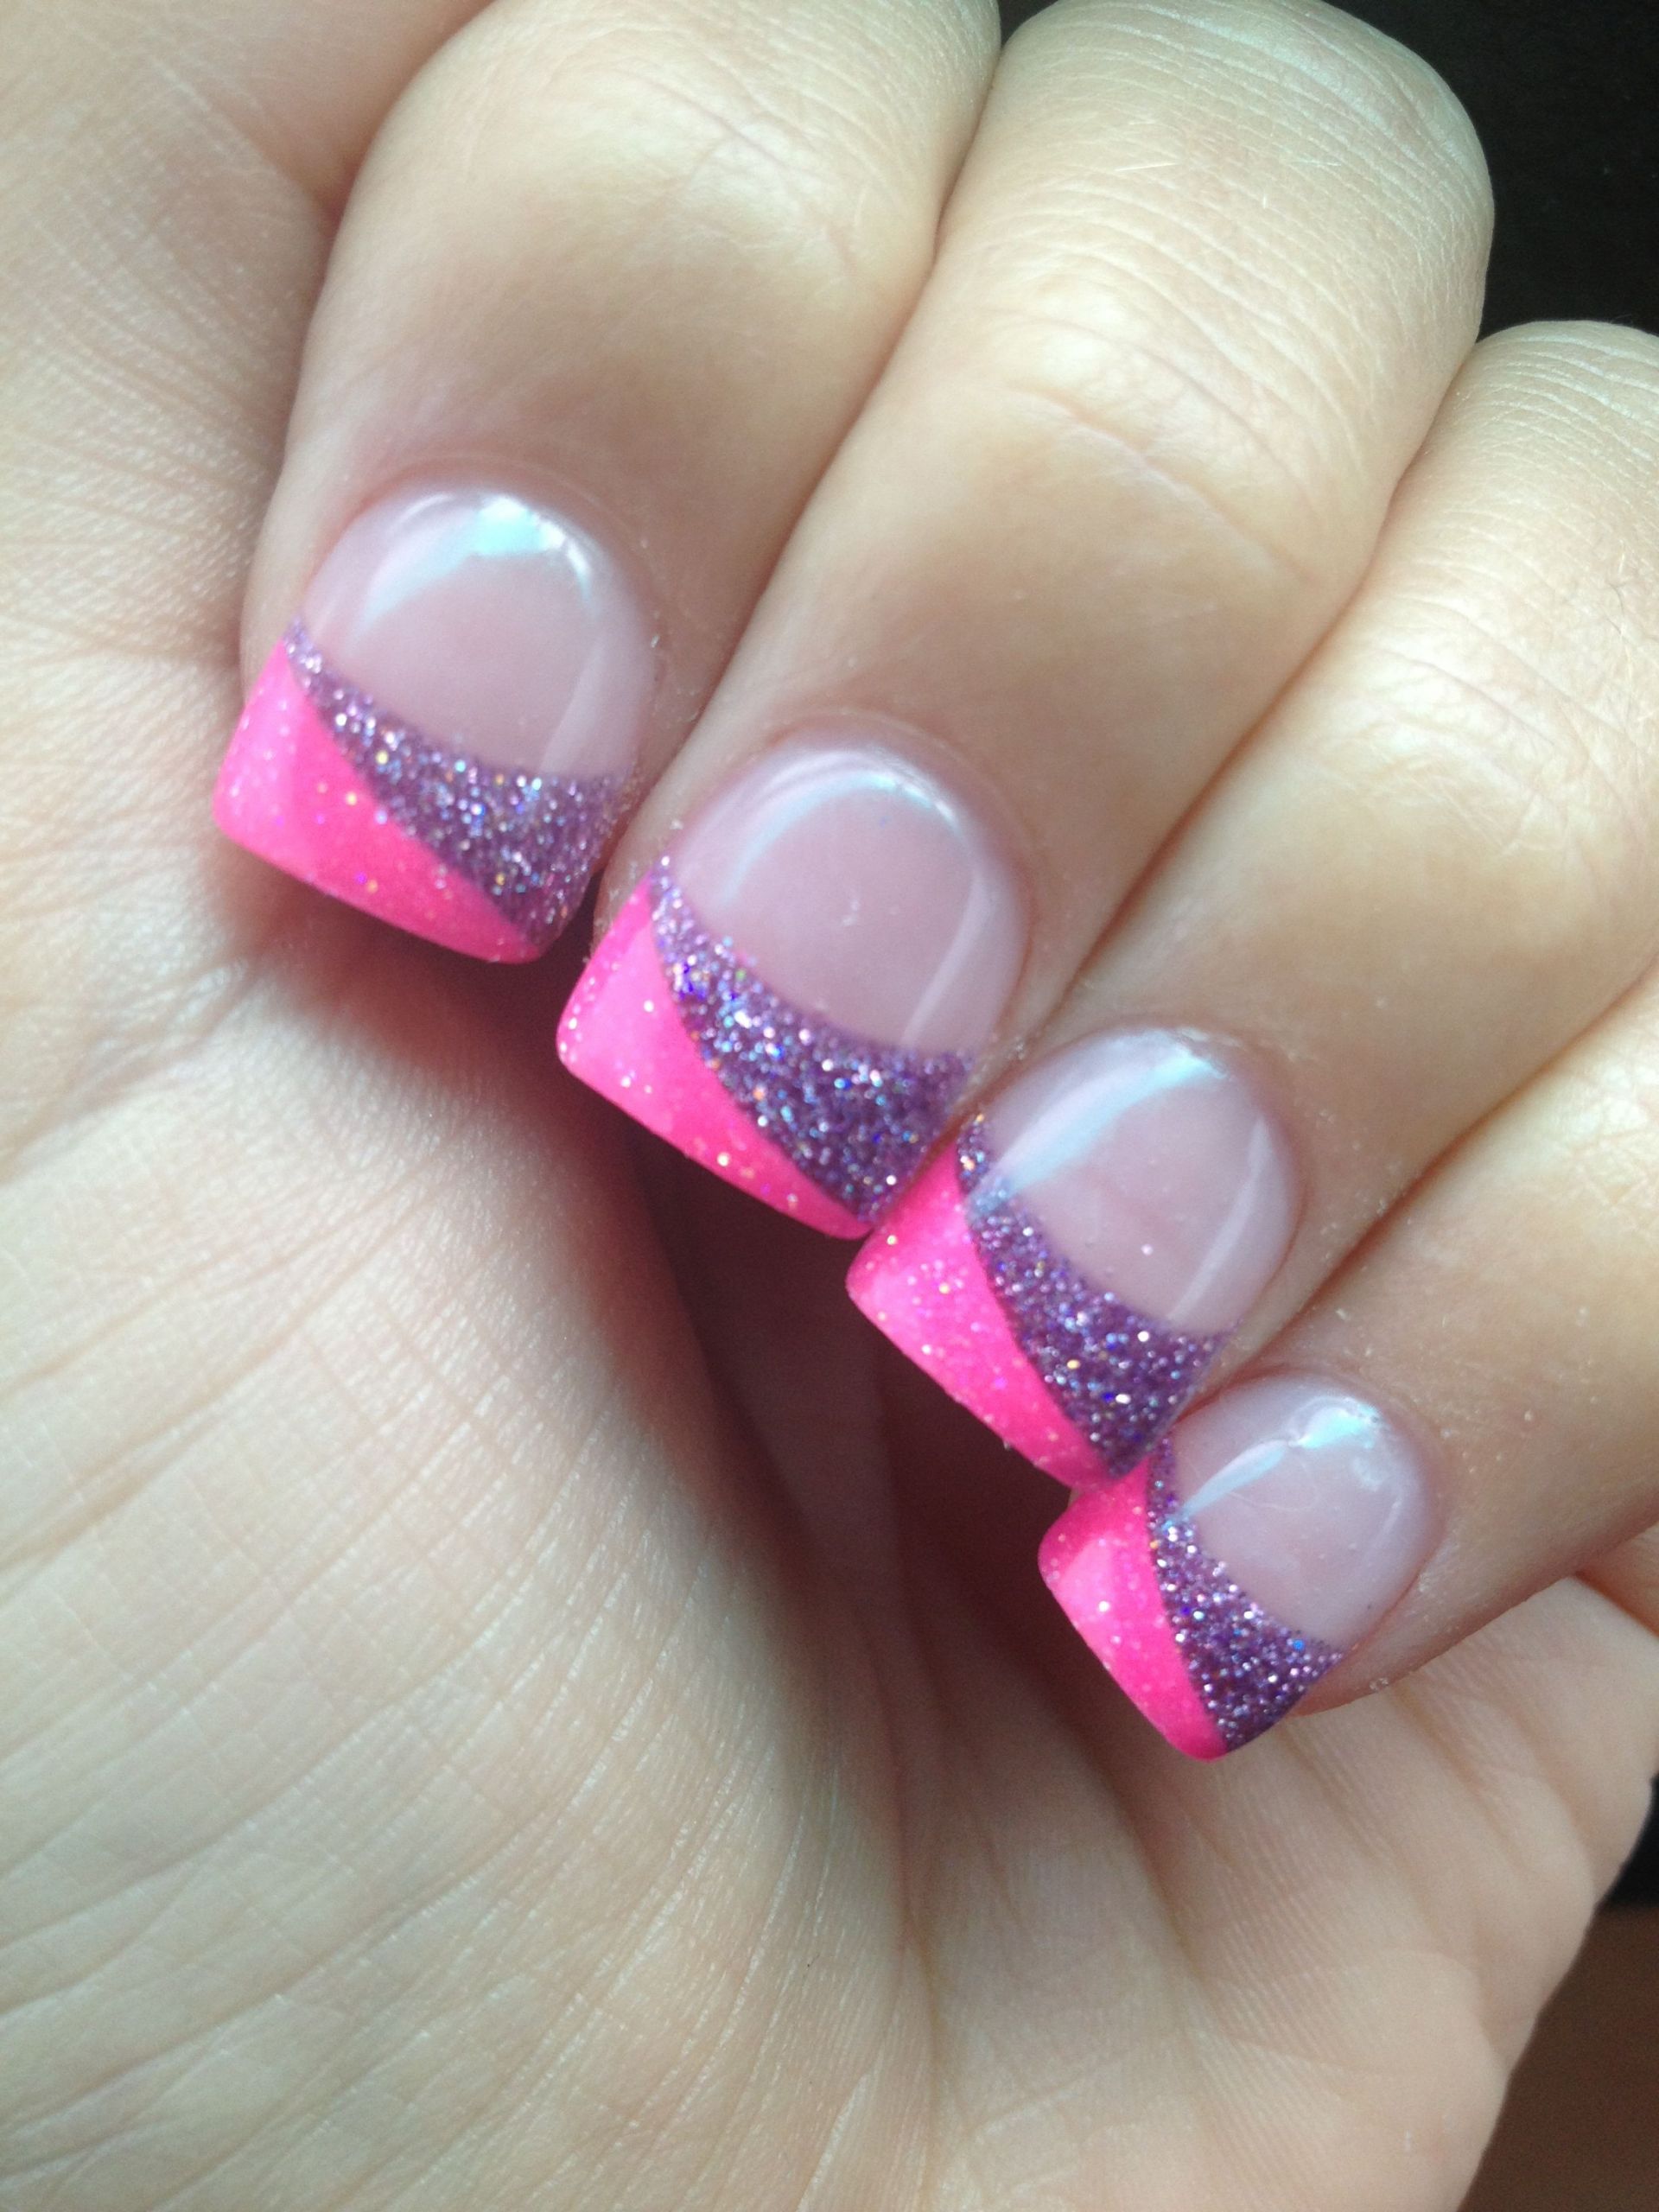 Acrylic Nail Colors And Designs
 Split tip pink and purple sparkley acrylic nails Half